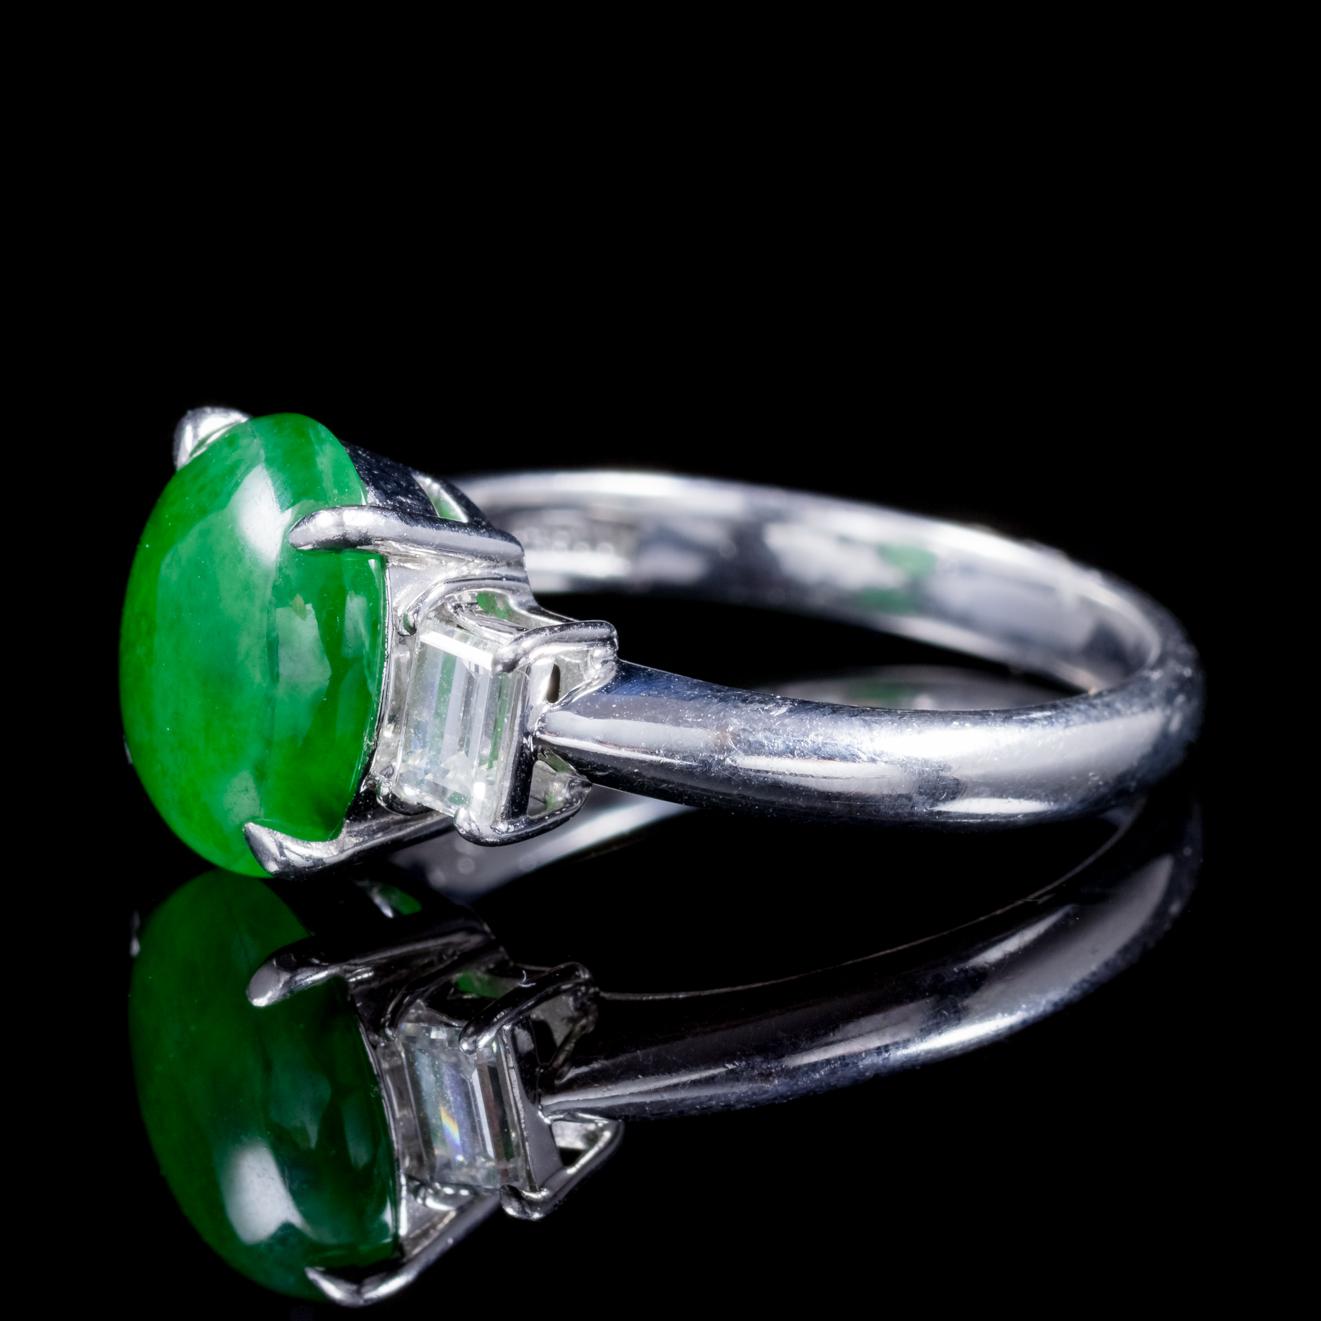 A fabulous antique Edwardian Platinum trilogy ring C. 1915, adorned with a lovely 2.65ct Jade stone in the centre flanked by two emerald cut Diamonds. 

Jade is considered the ultimate ‘Dream Stone’ and has been admired in ancient cultures